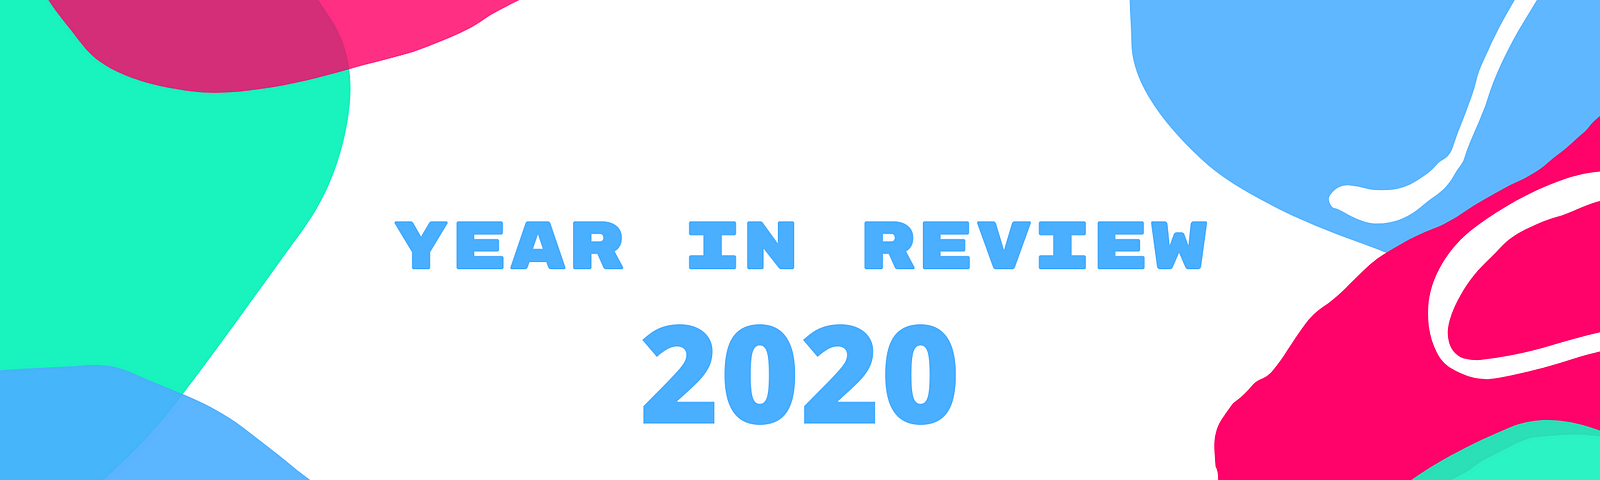 An abstrscr grsphic featuring the words Year in Review 2020 and the codebar logo